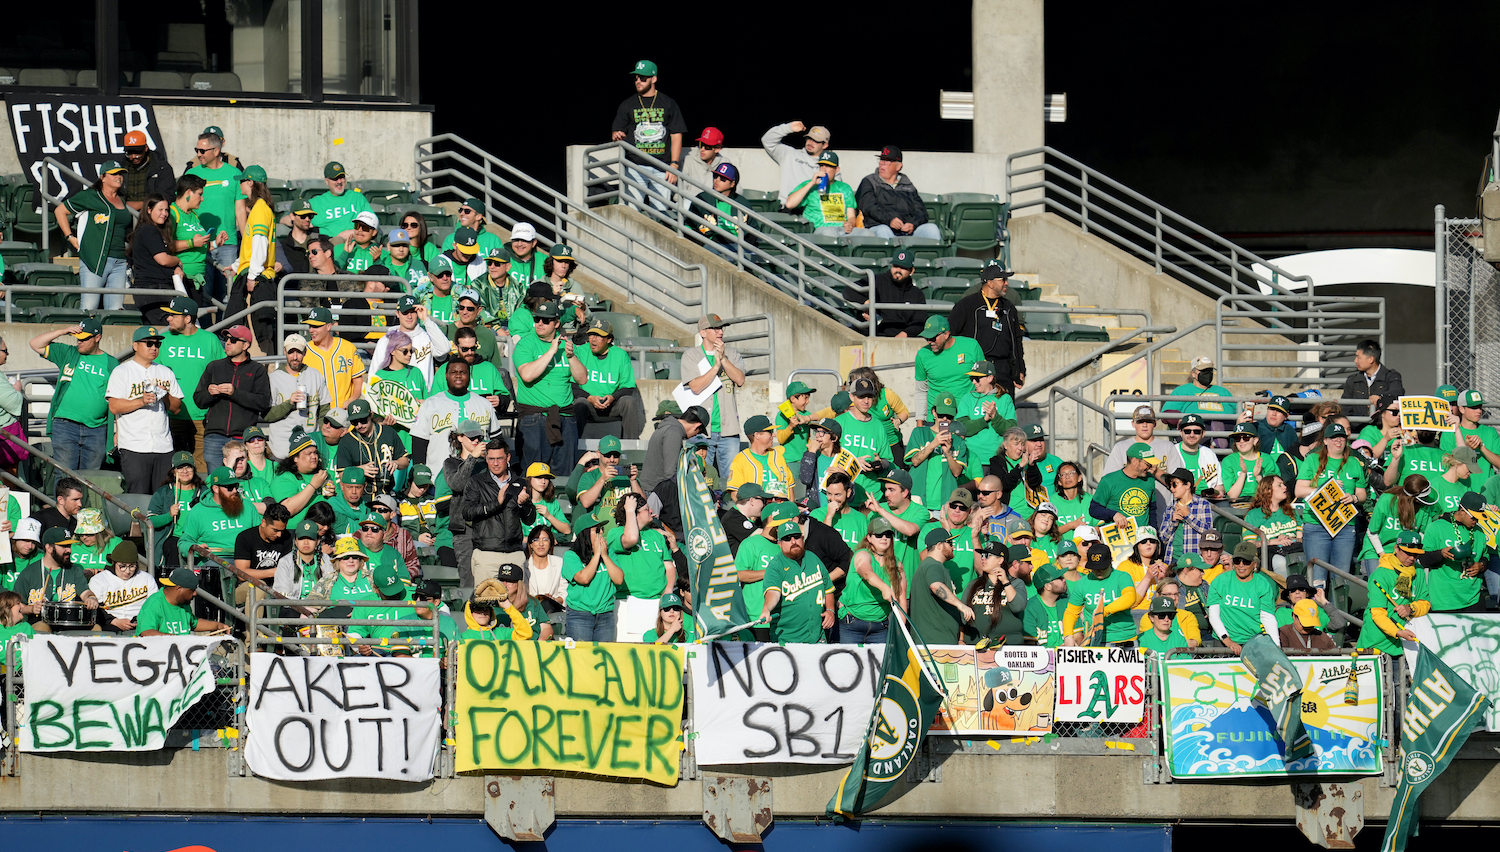 OAKLAND, CALIFORNIA - JUNE 13: Oakland Athletics fans display signs during a reverse boycott game against the Tampa Bay Rays at RingCentral Coliseum on June 13, 2023 in Oakland, California. (Photo by Brandon Vallance/Getty Images)